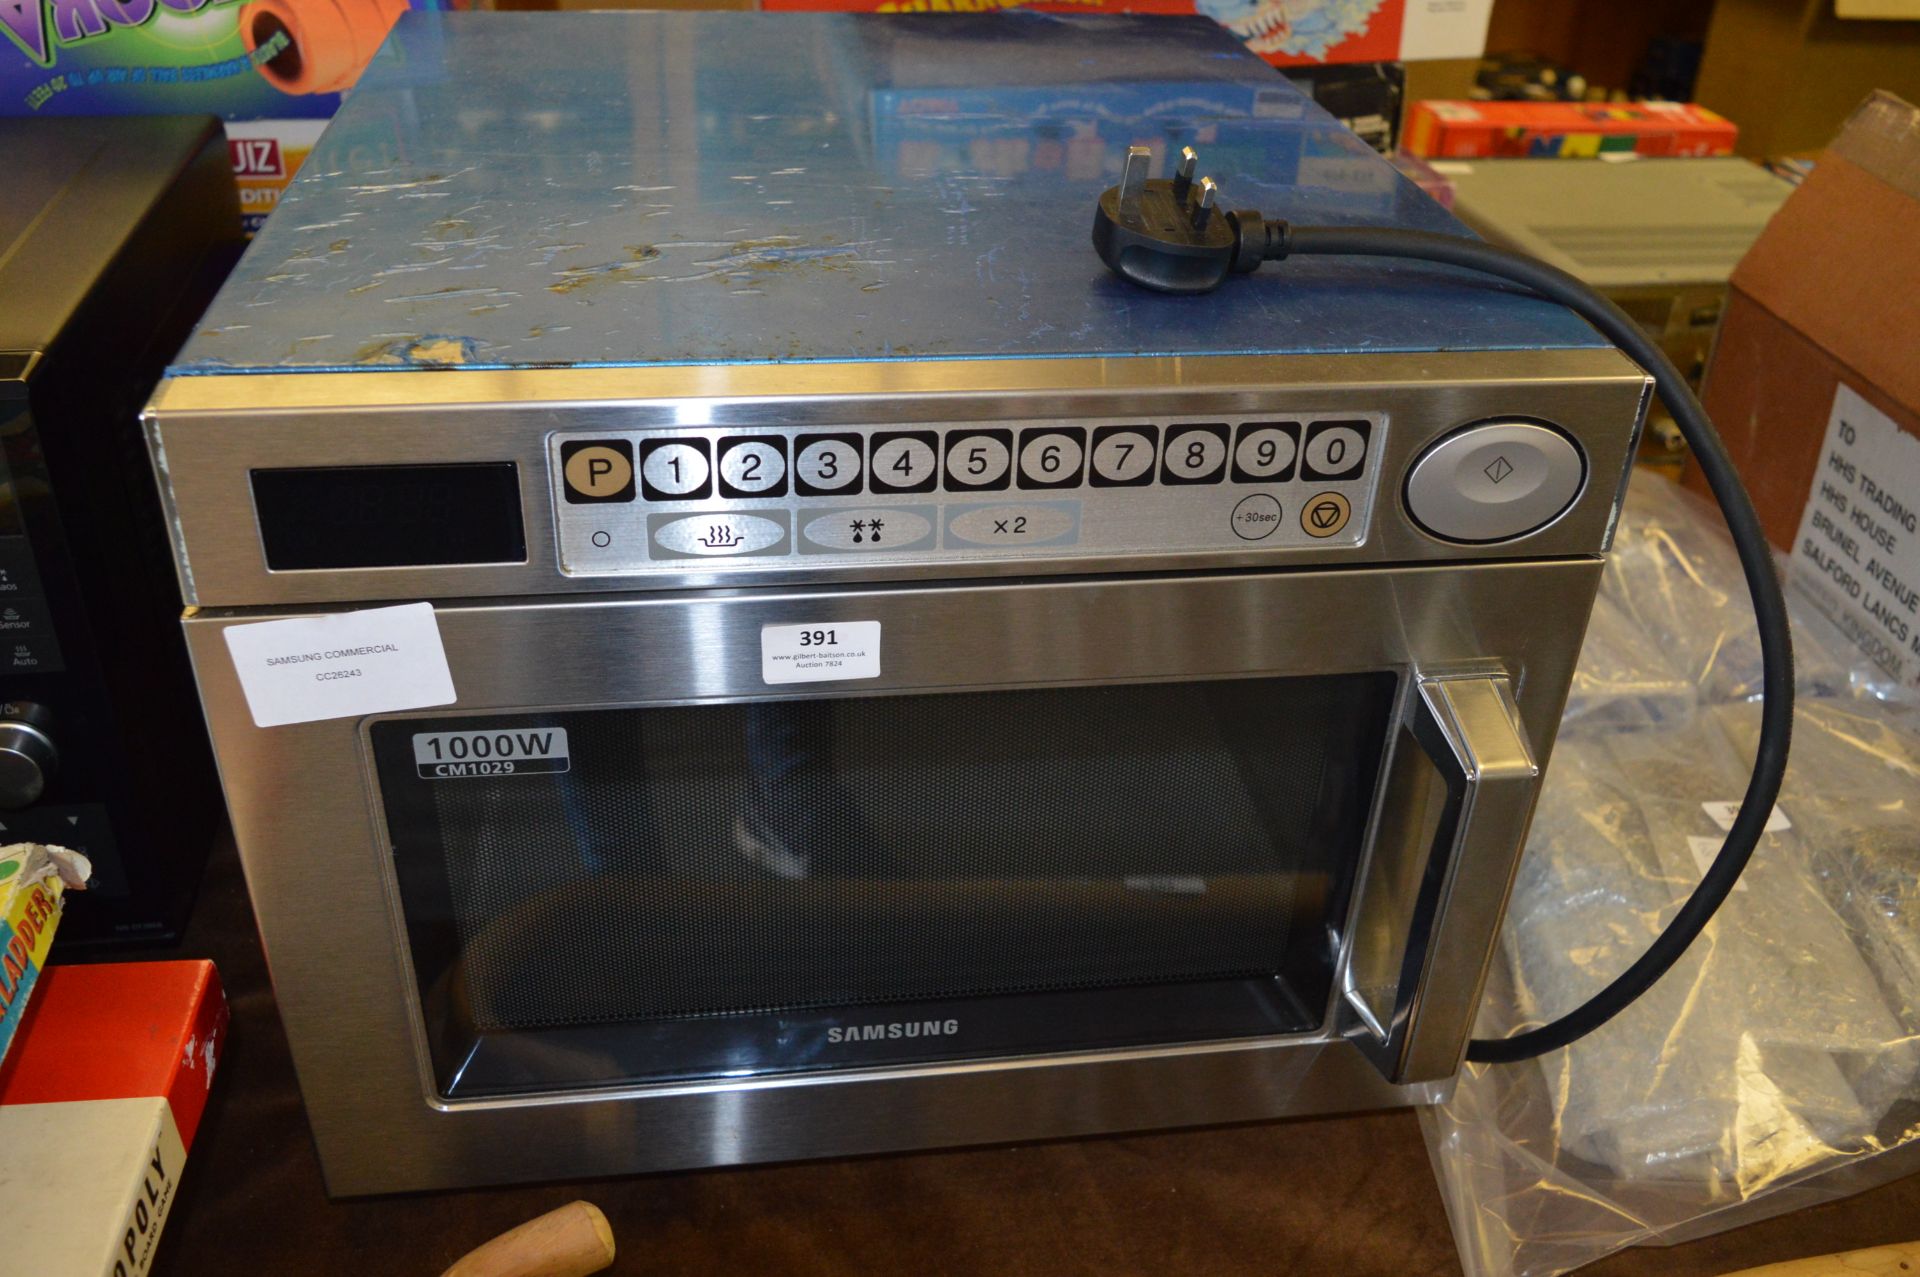 *Samsung Commercial 1000W Microwave Oven